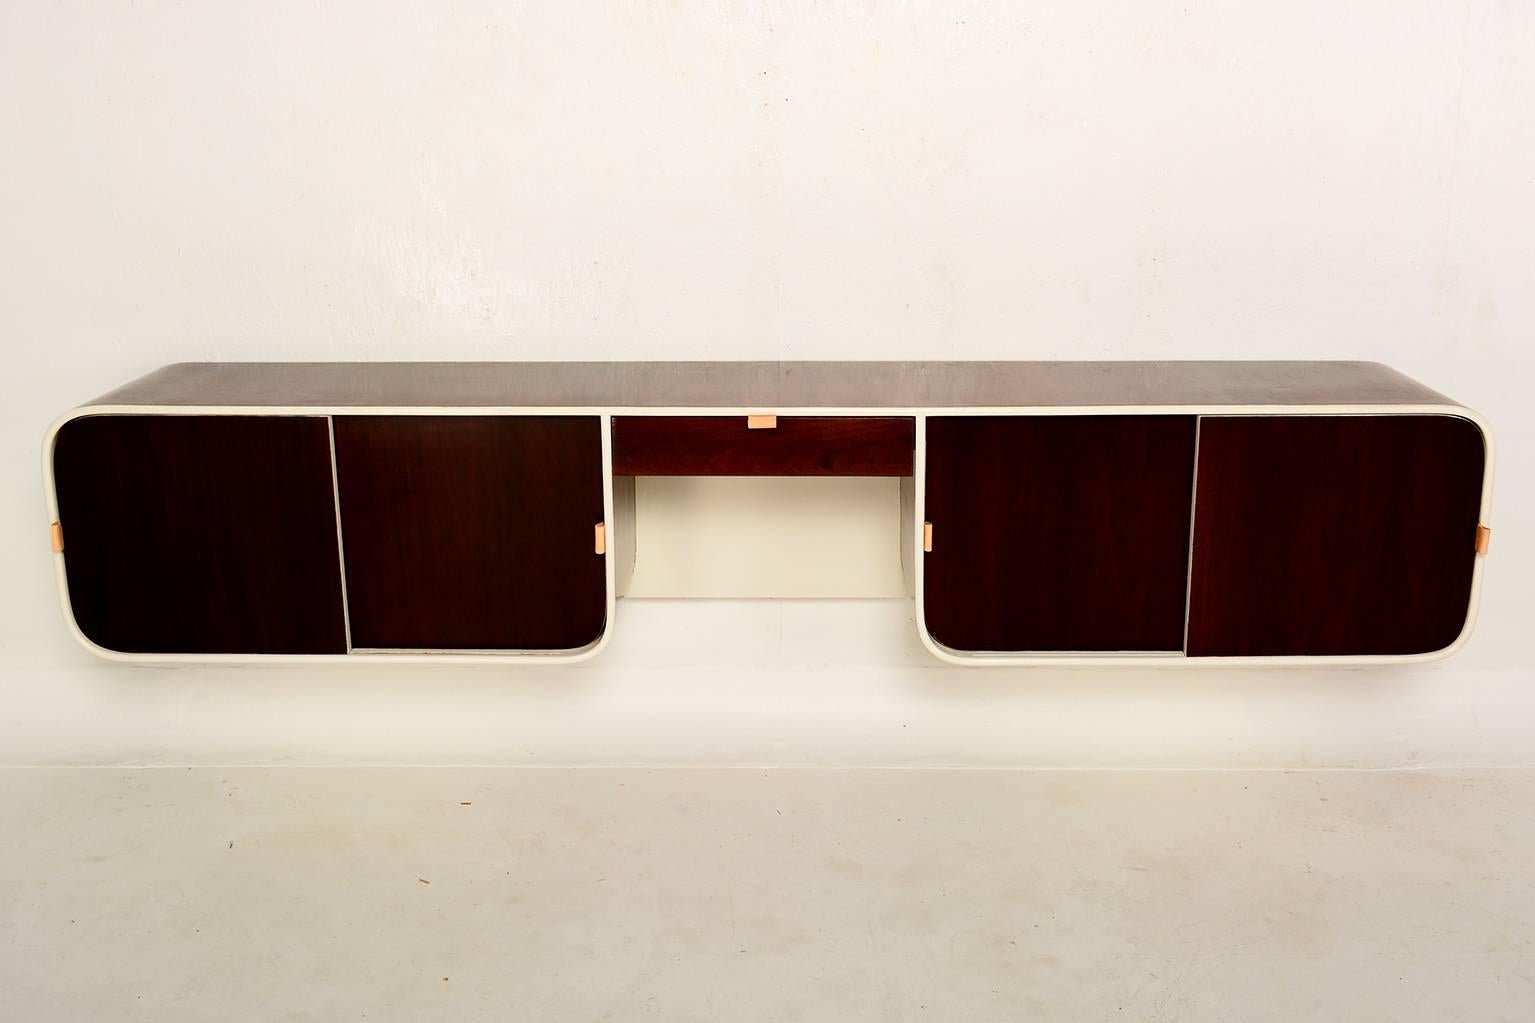 Lacquered Mid-Century Modern Wall Hanging Credenza after Henry P. Glass